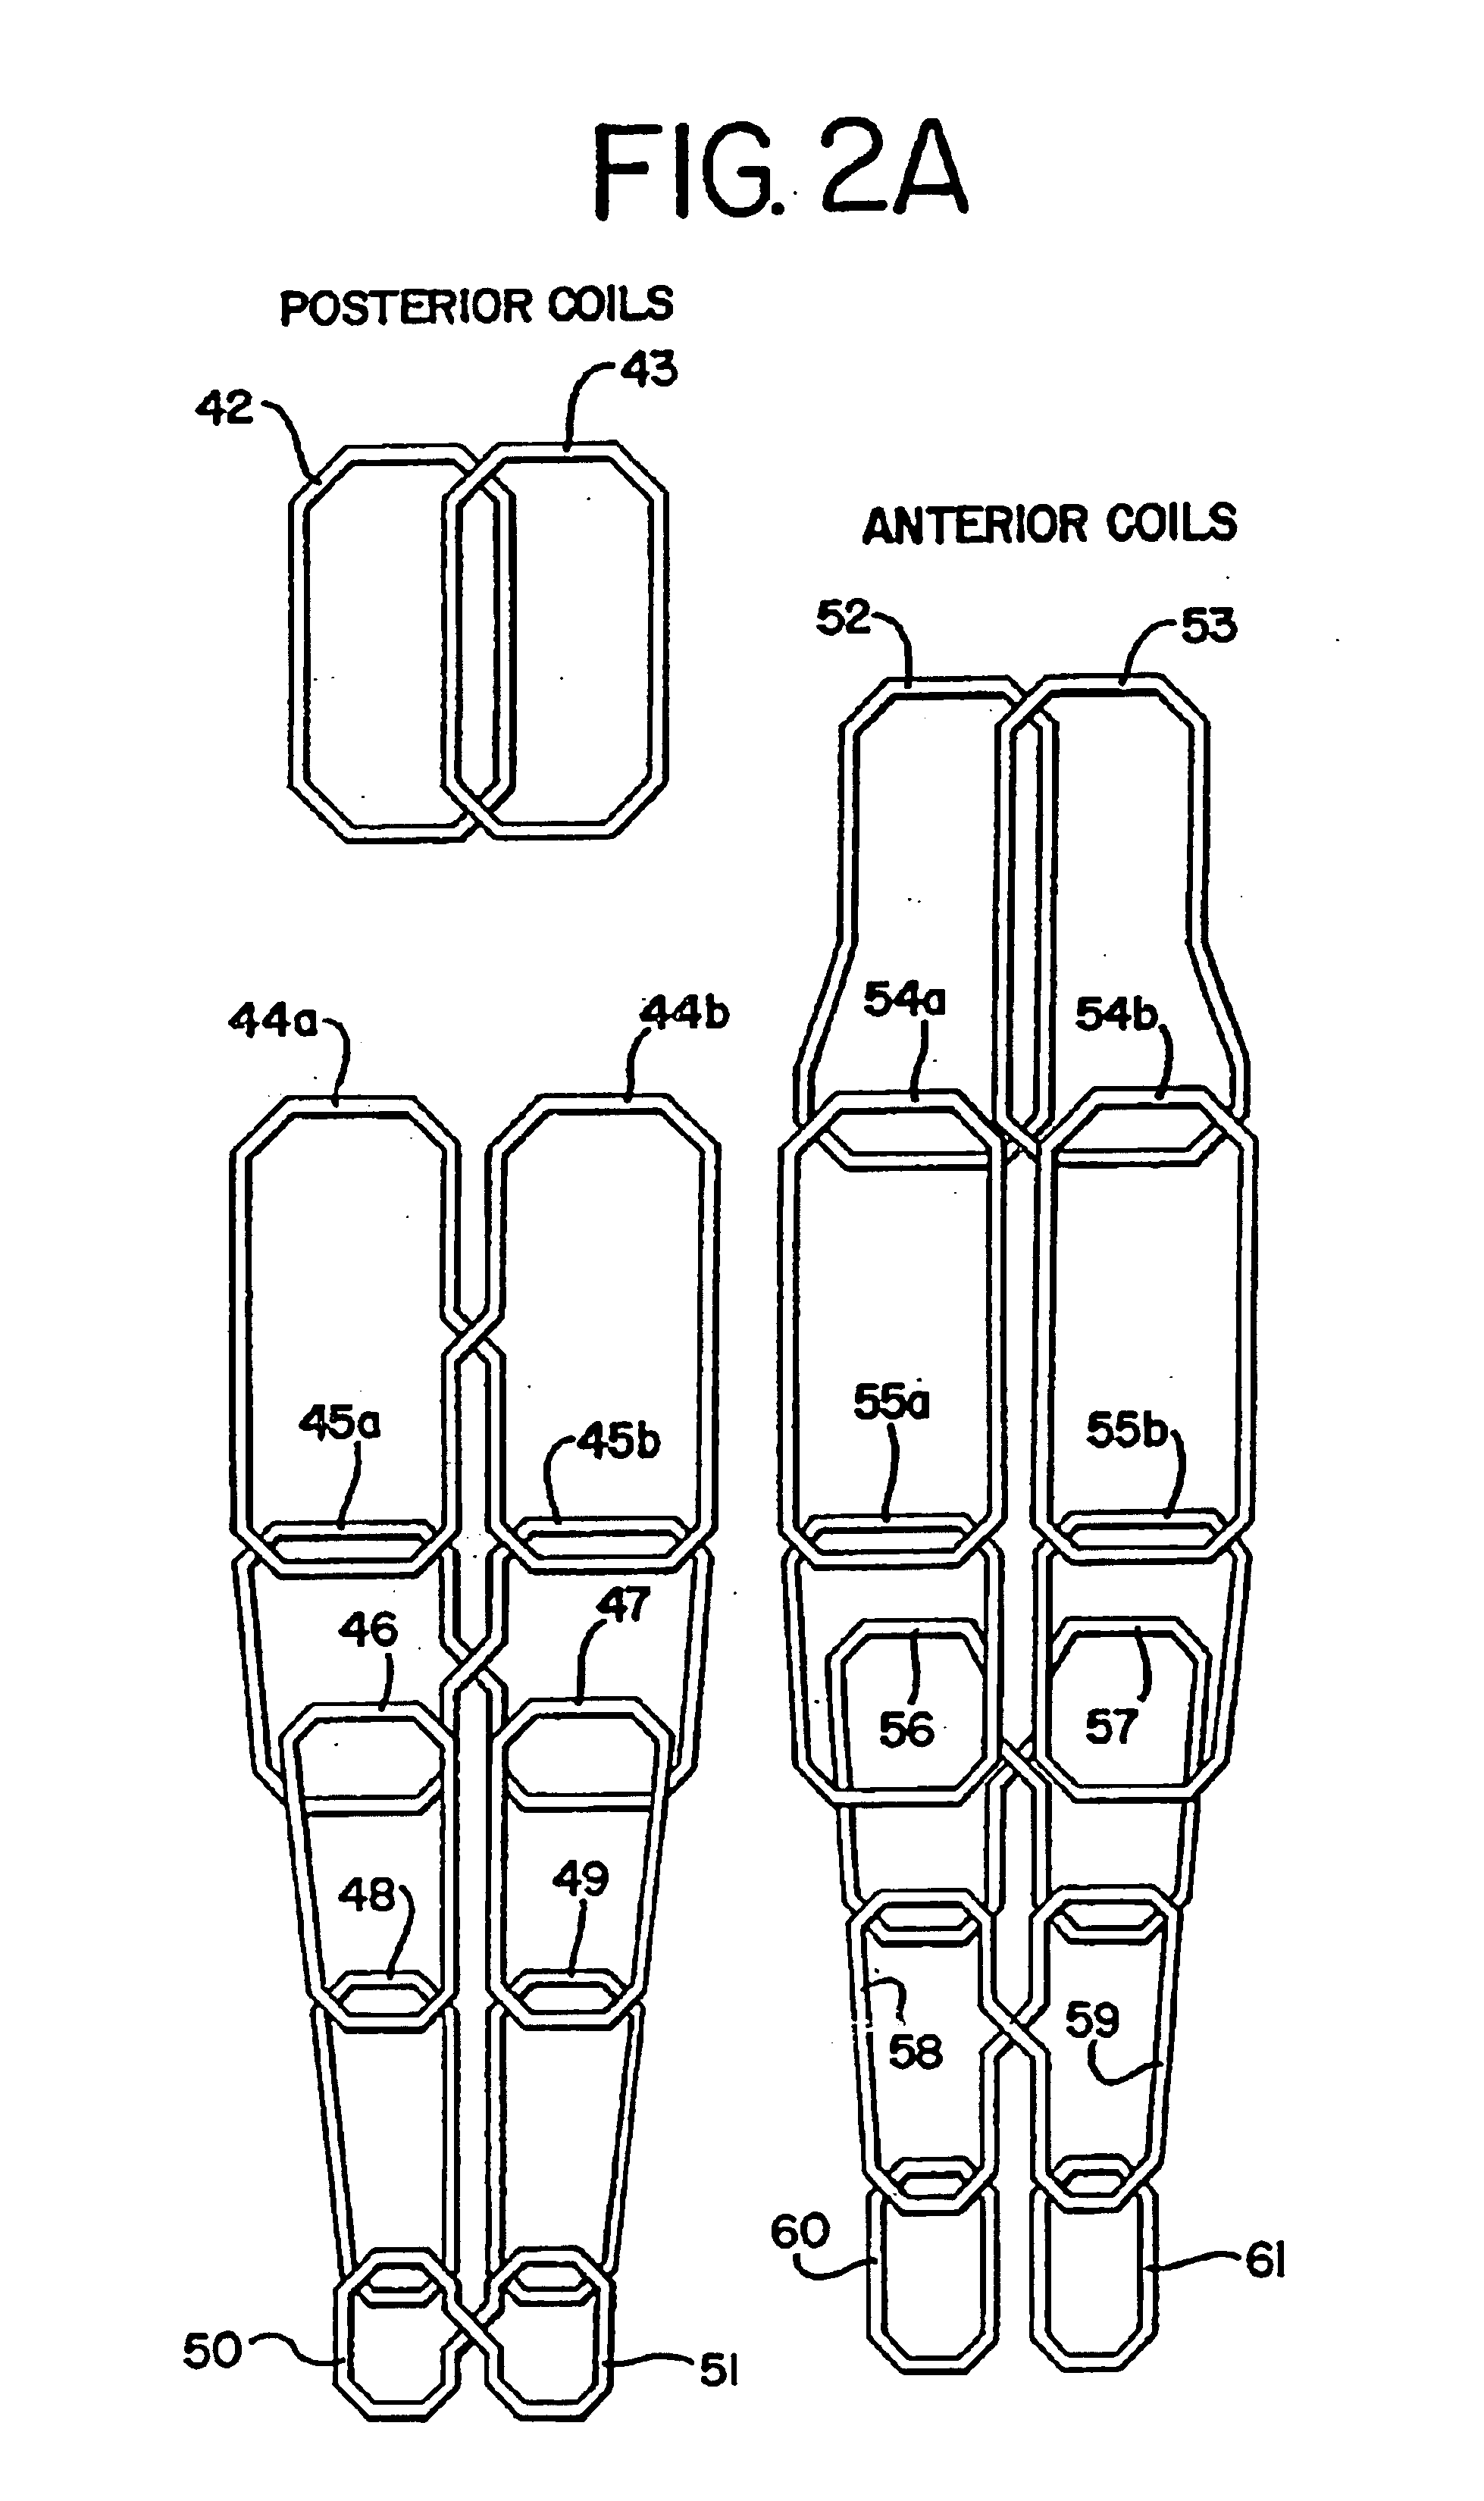 Circuit for selectively enabling and disabling coils of a multi-coil array